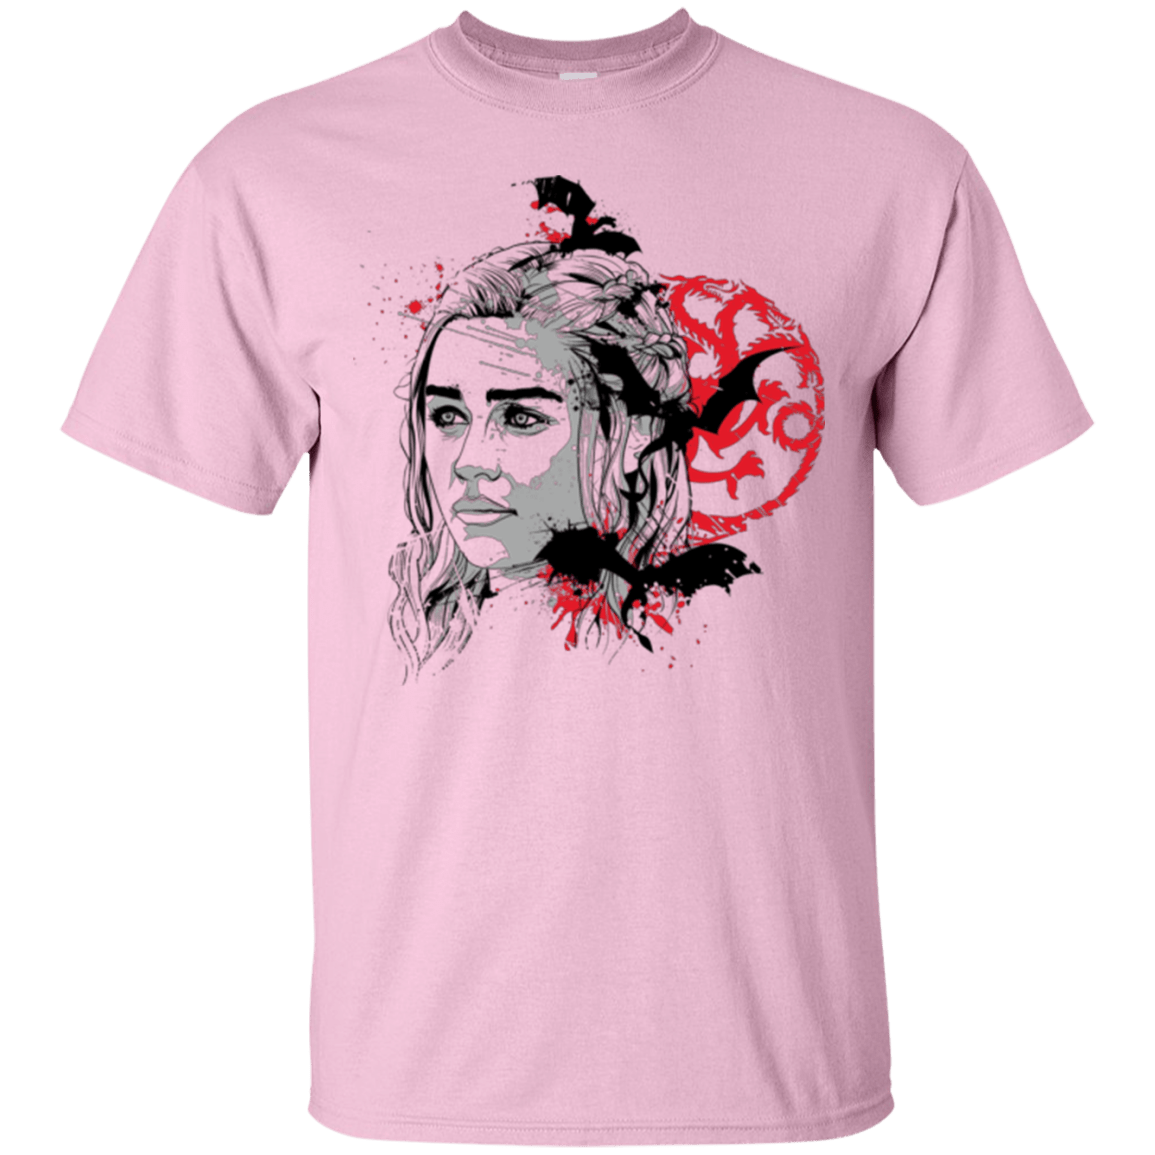 T-Shirts Light Pink / Small MOTHER OF DRAGONS (1) T-Shirt